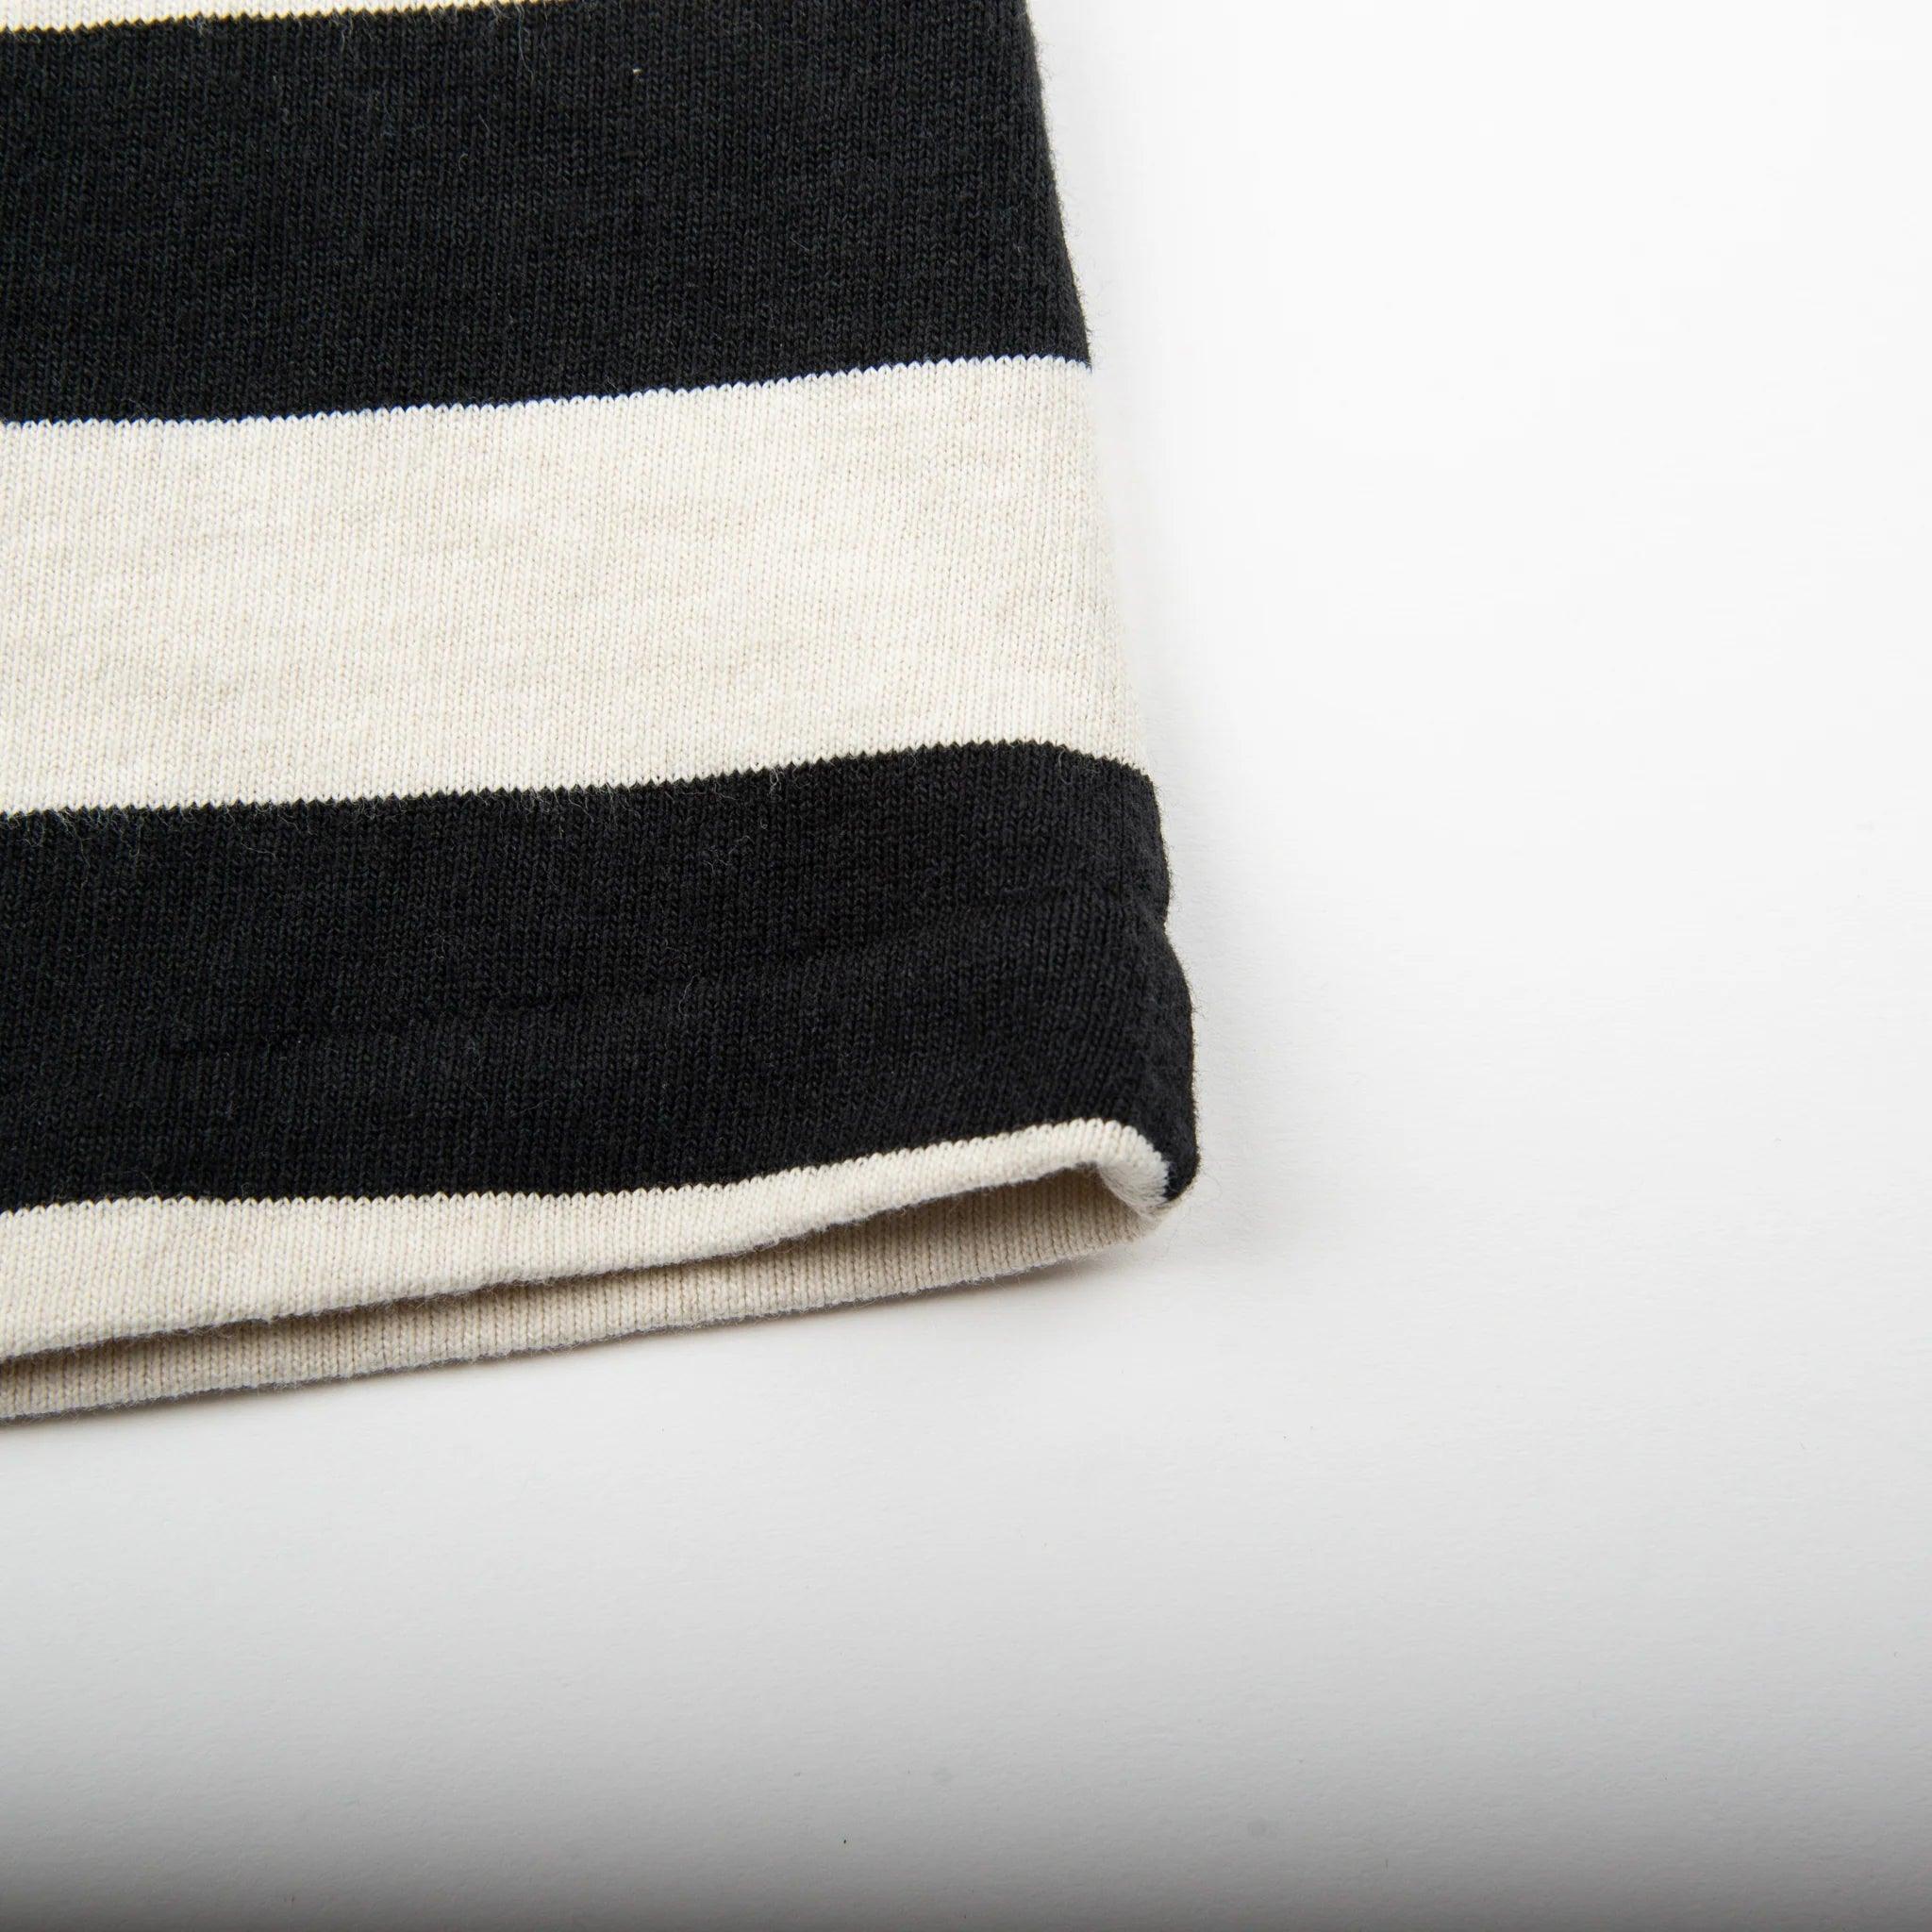 Shifter Striped Tee - Black/Natural - Guilty Party